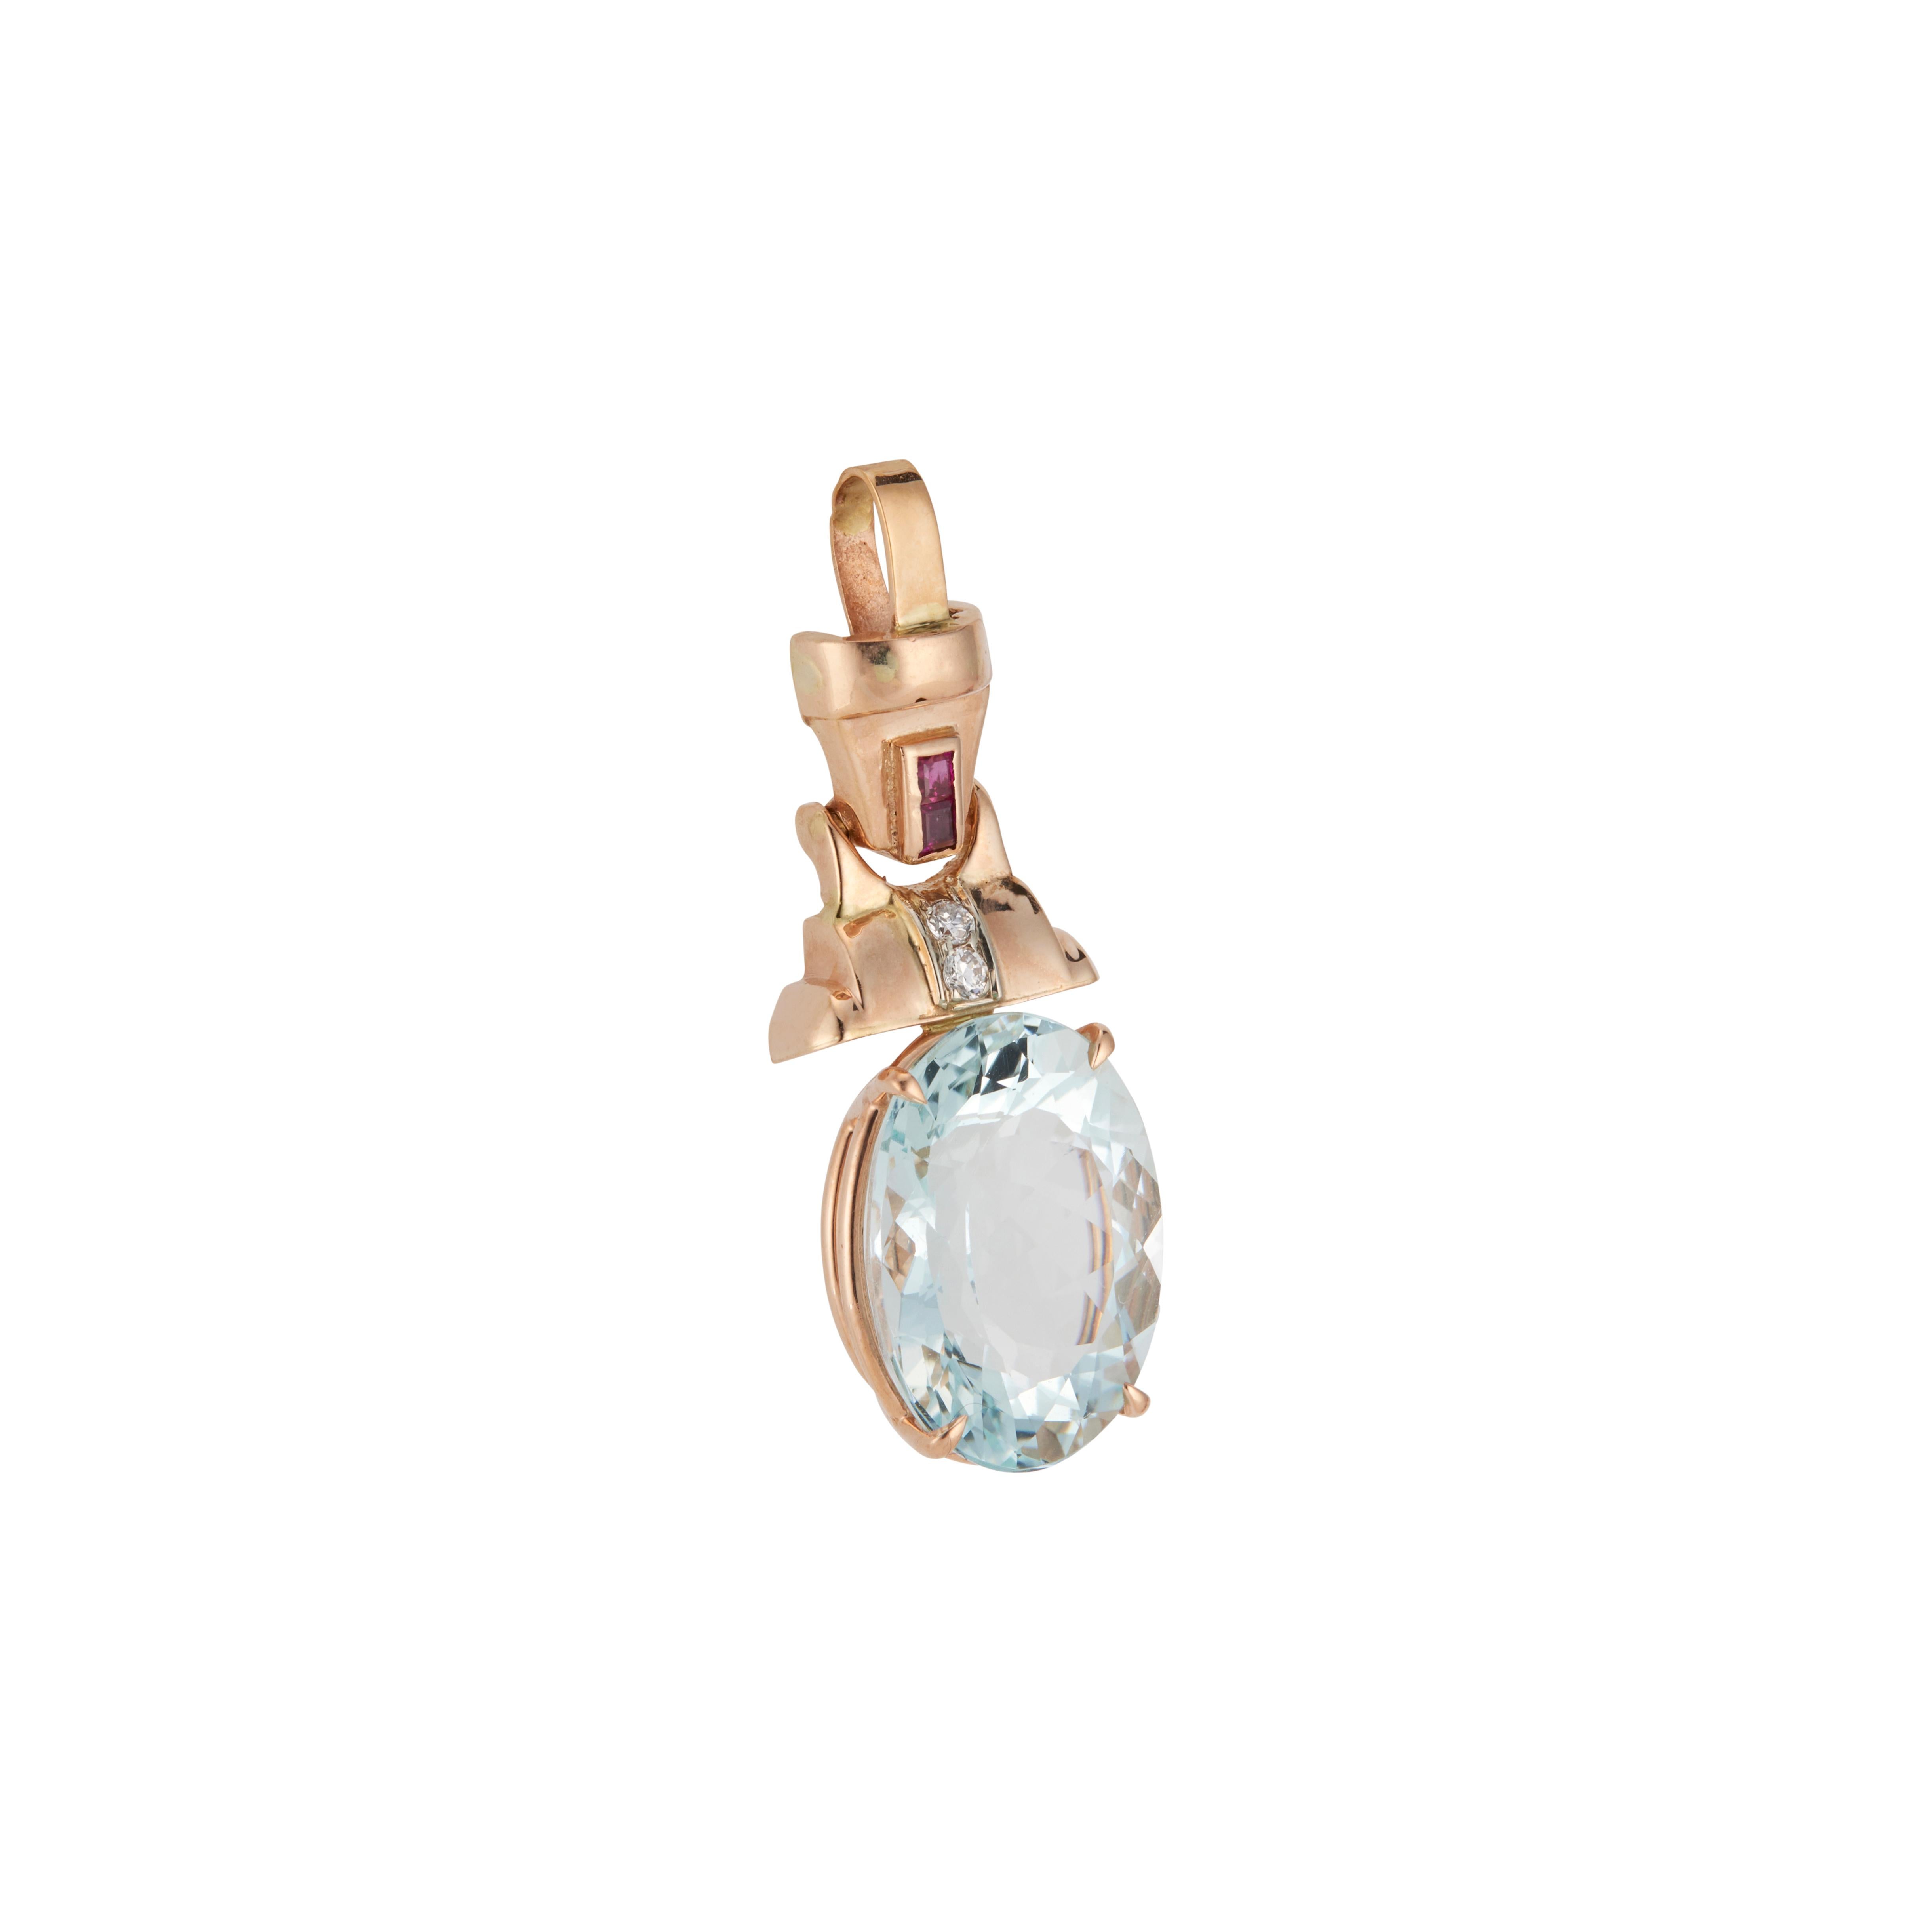 Retro Art Deco Aqua, diamond and ruby pendant. 9.00ct oval natural aqua set in 14k rose gold setting with two round rubies and two full cut round diamonds. circa 1930-1940. 

1 bright greenish blue oval natural Aqua, approx. total weight 9.00cts,